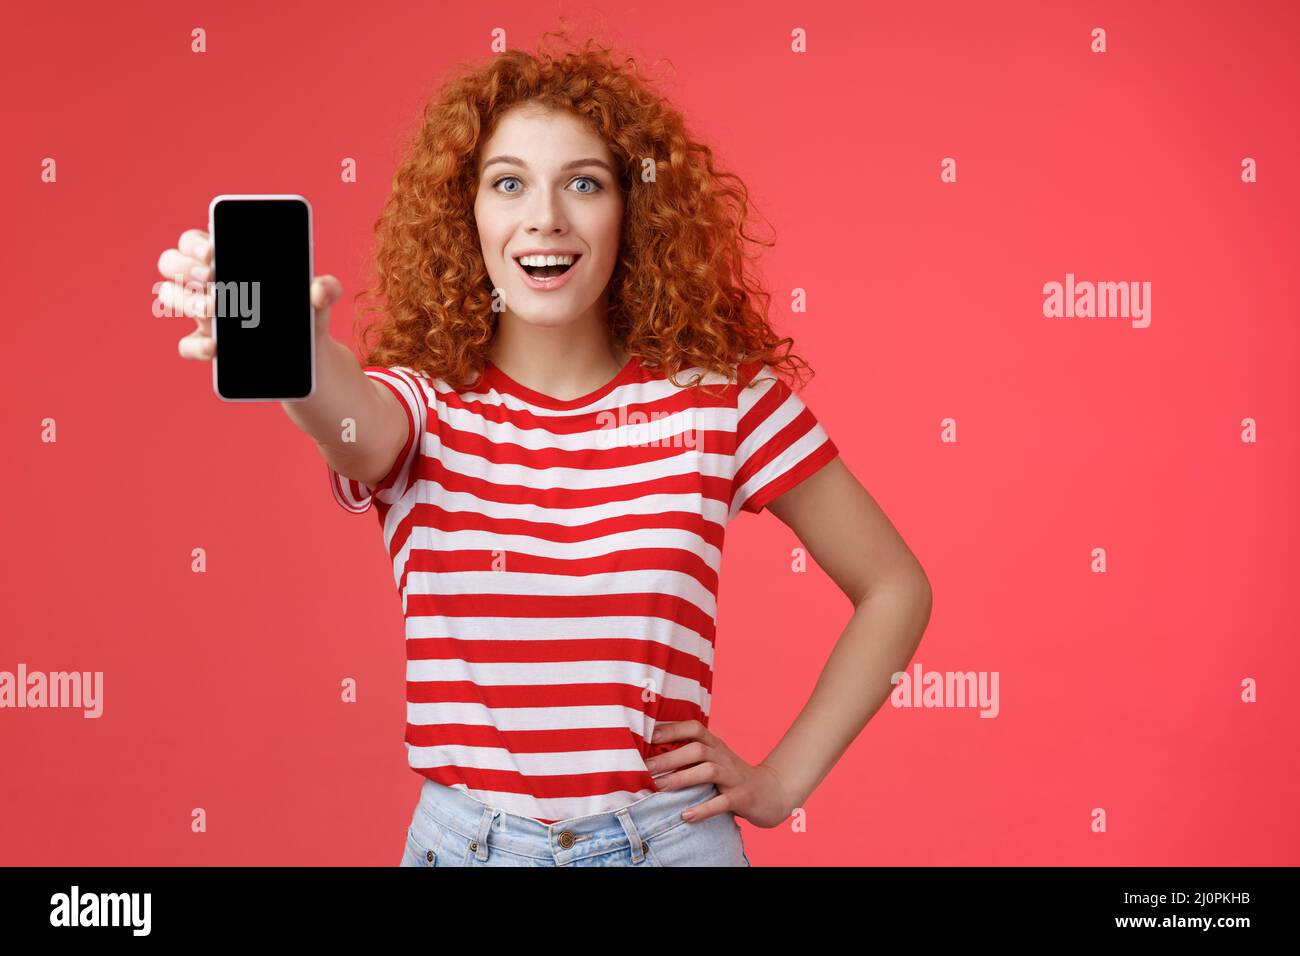 Cheerful attractive charismatic european redhead girl curly hairstyle show smartphone screen smiling happily promote app advice Stock Photo